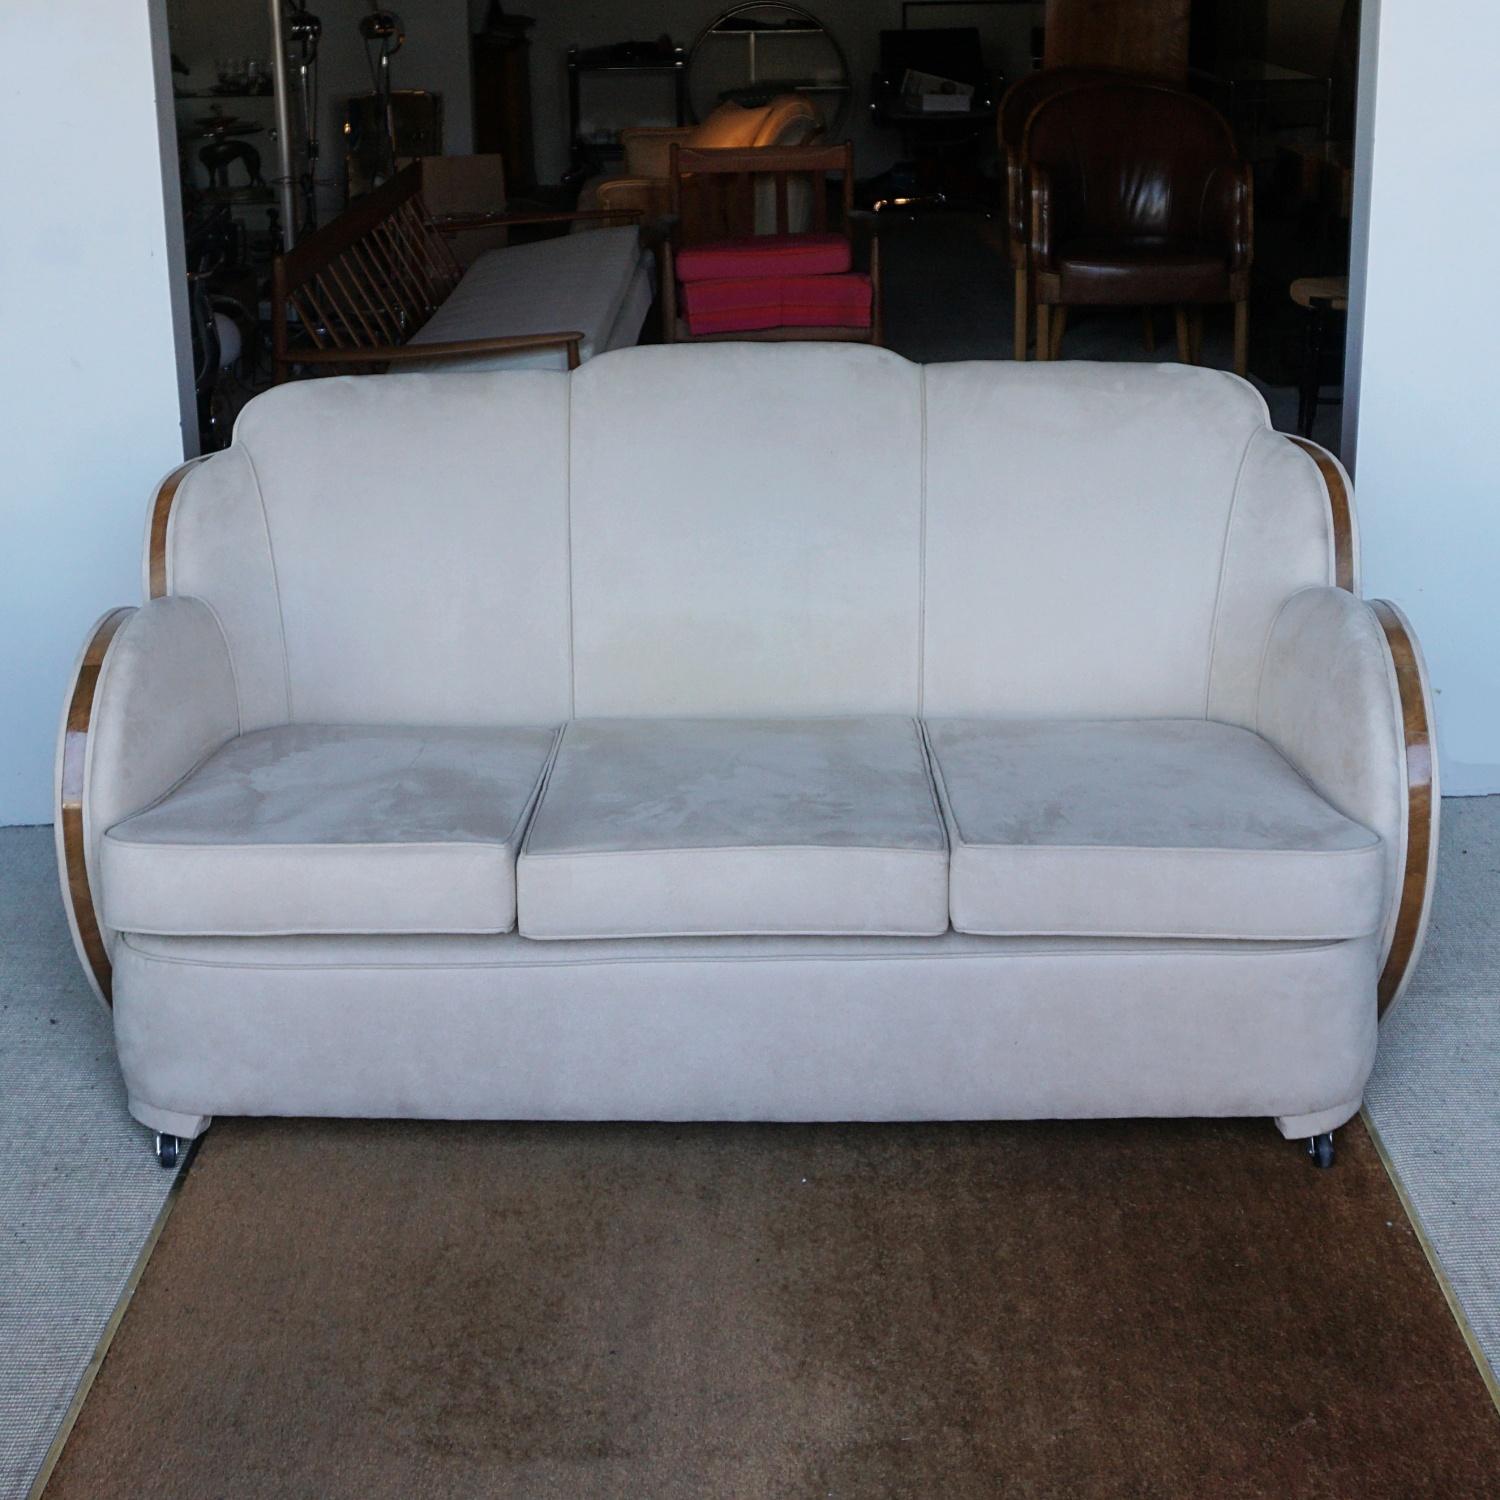 An Art Deco three seat cloud back sofa by Harry and Lou Epstein. Figured walnut banding, re-upholstered in Alcantara suede. Replacement castors.

Dimensions: H 85cm, W 170cm, D 85cm, Seat H 45cm, Seat D 60cm

Origin: English

Date: